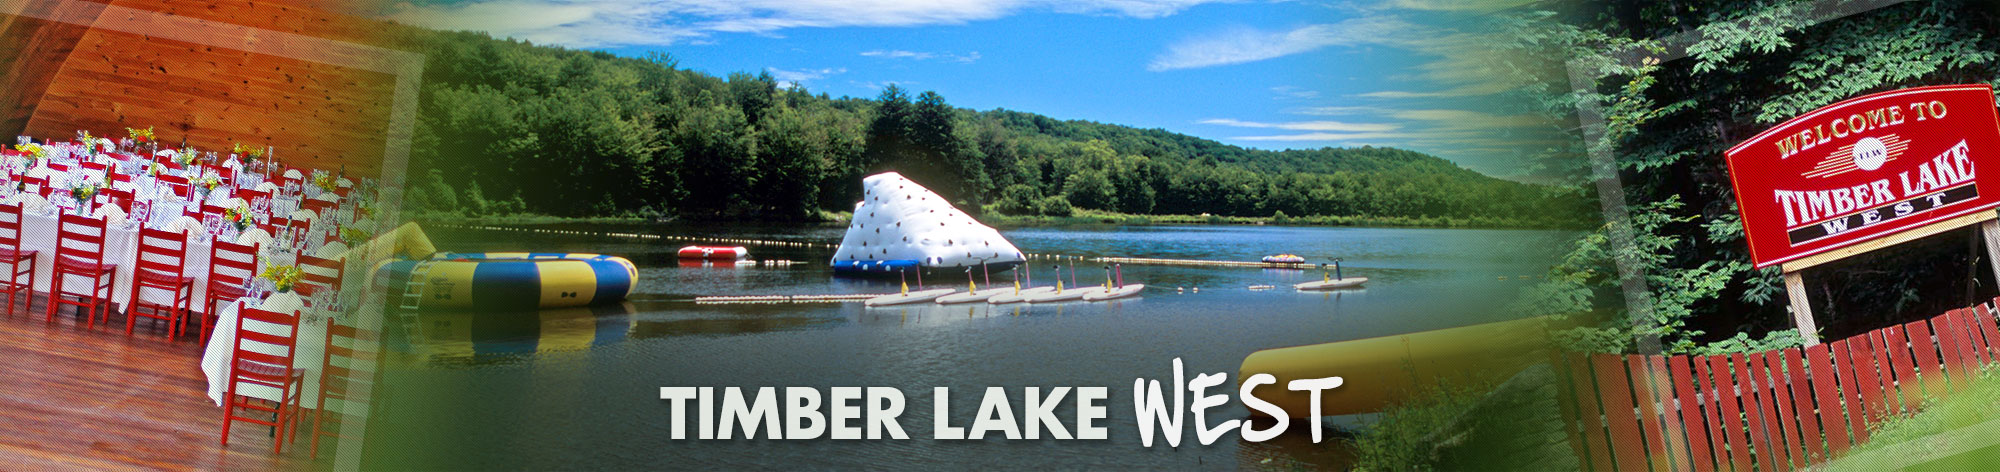 Events at Timber Lake West Summer Camp